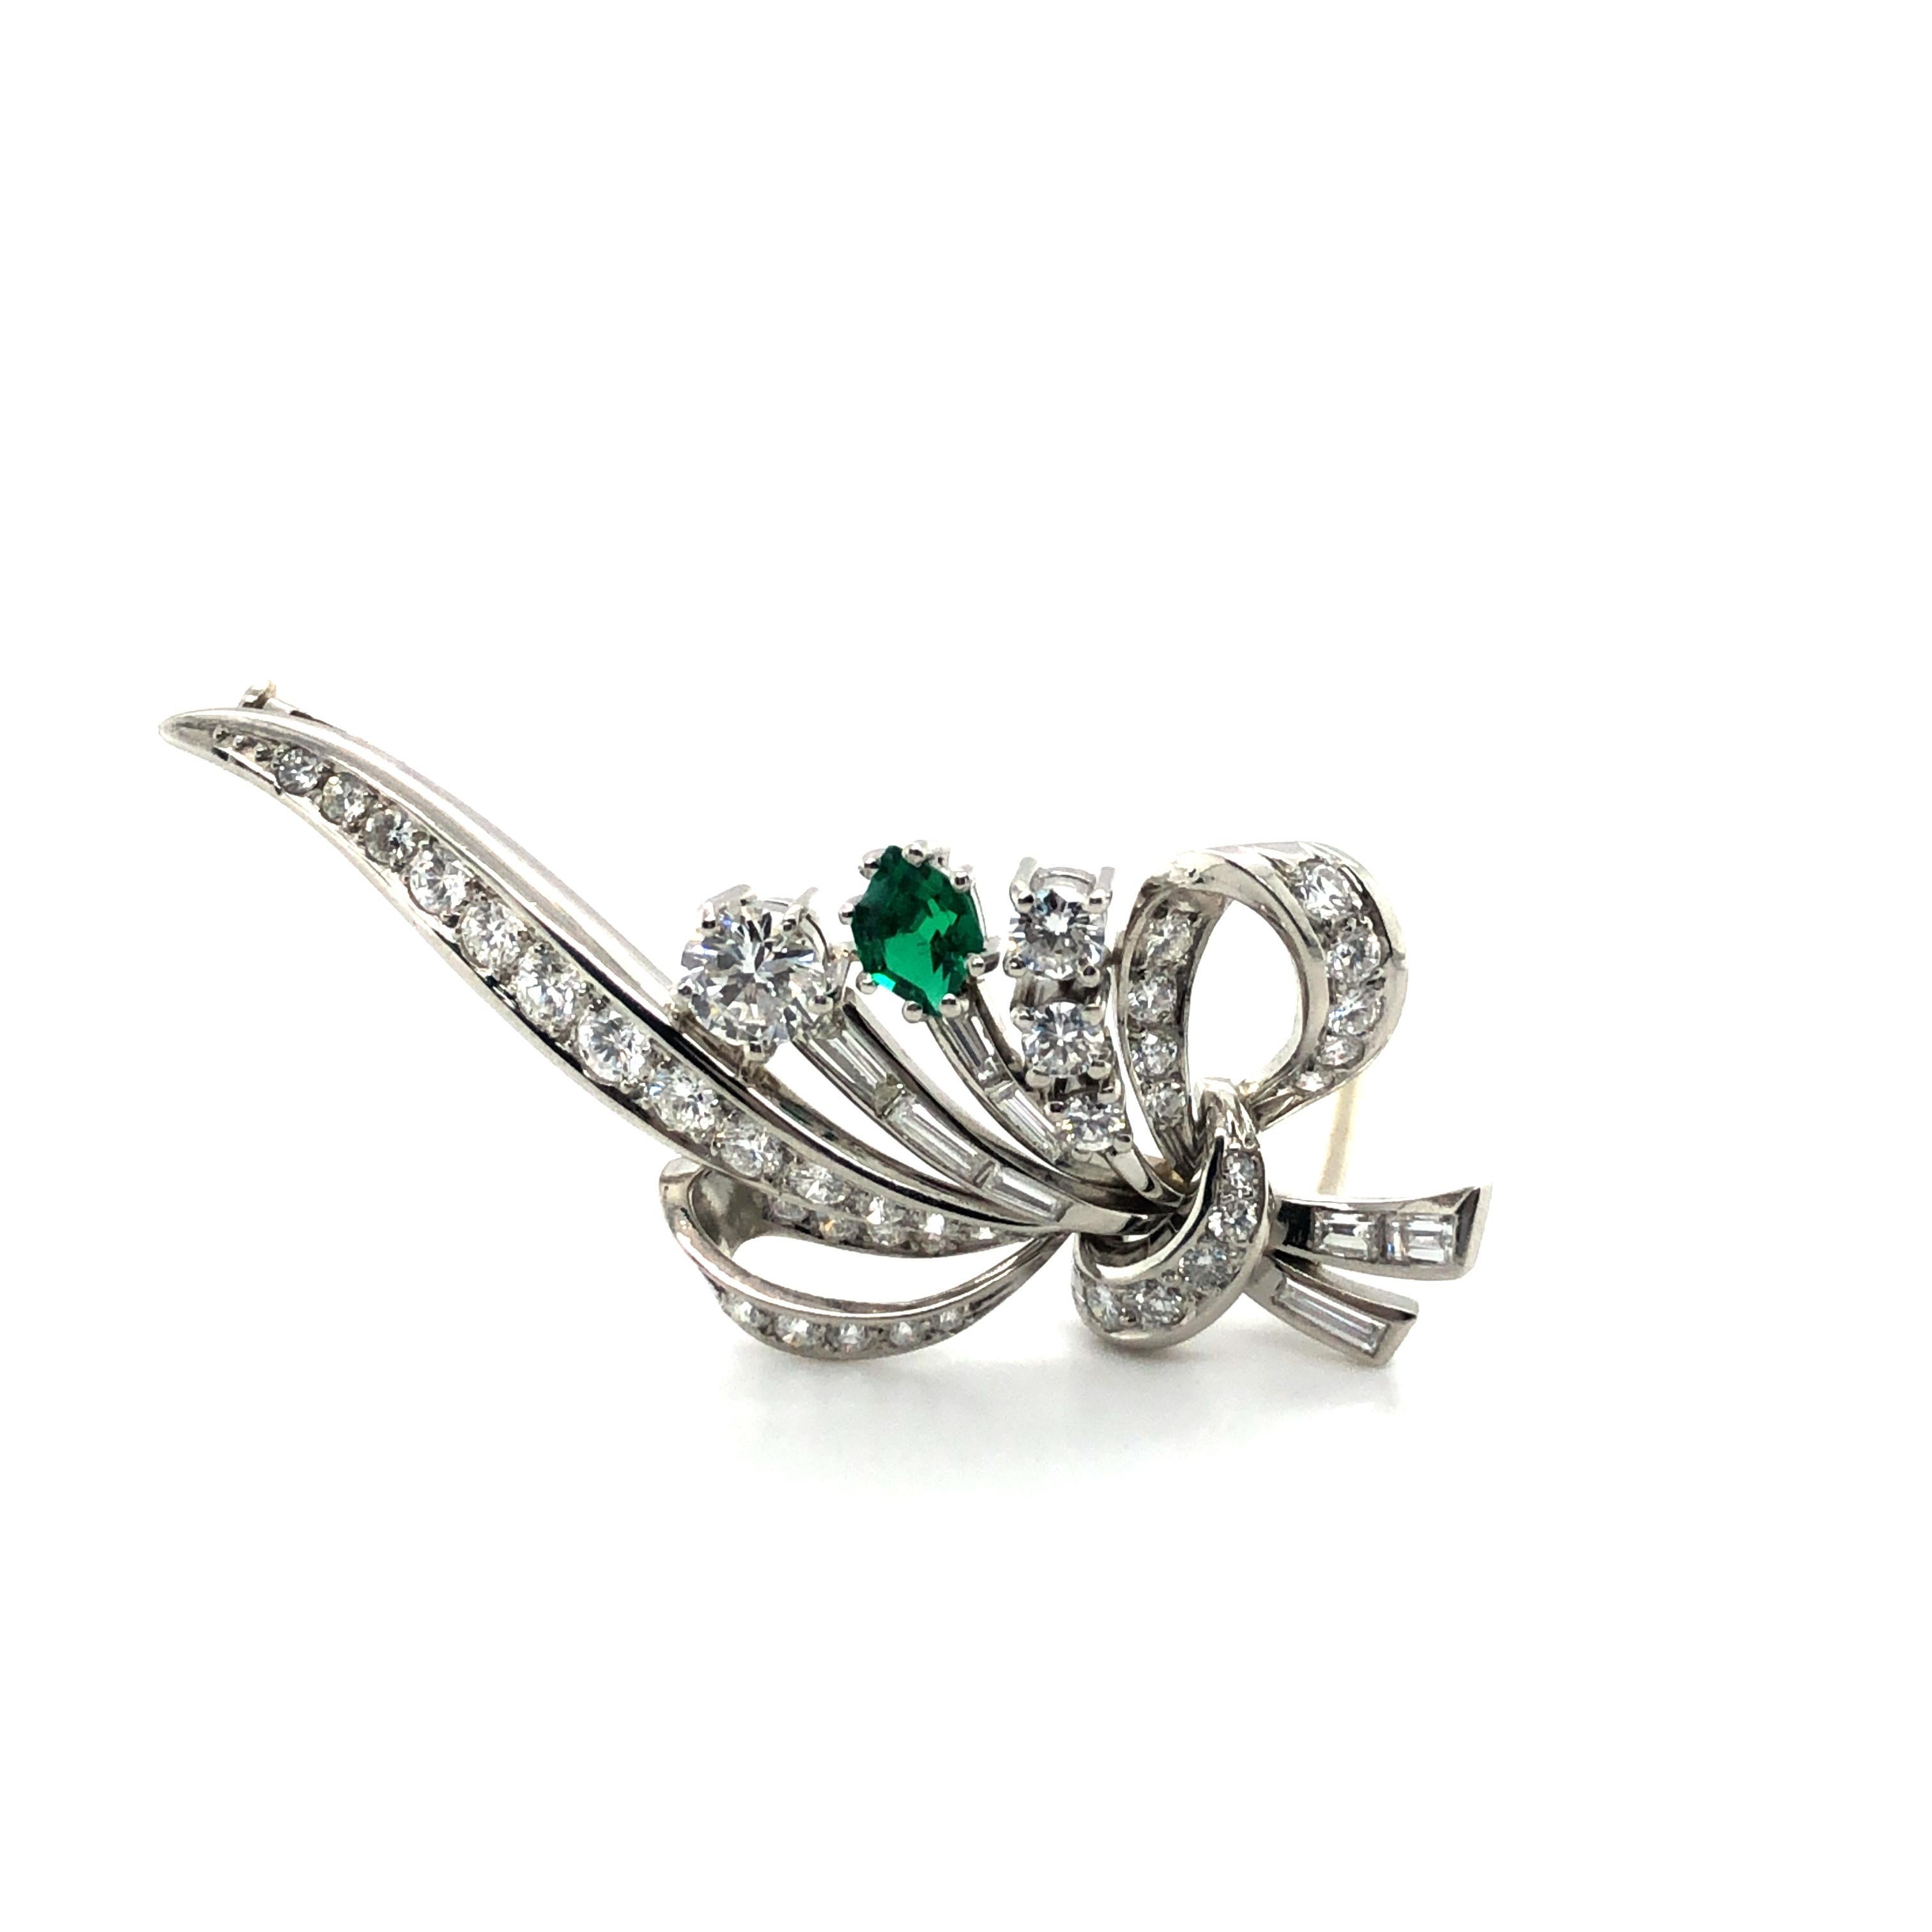 Modern Elegant Meister Diamond Brooch with Emerald in Platinum 950 For Sale